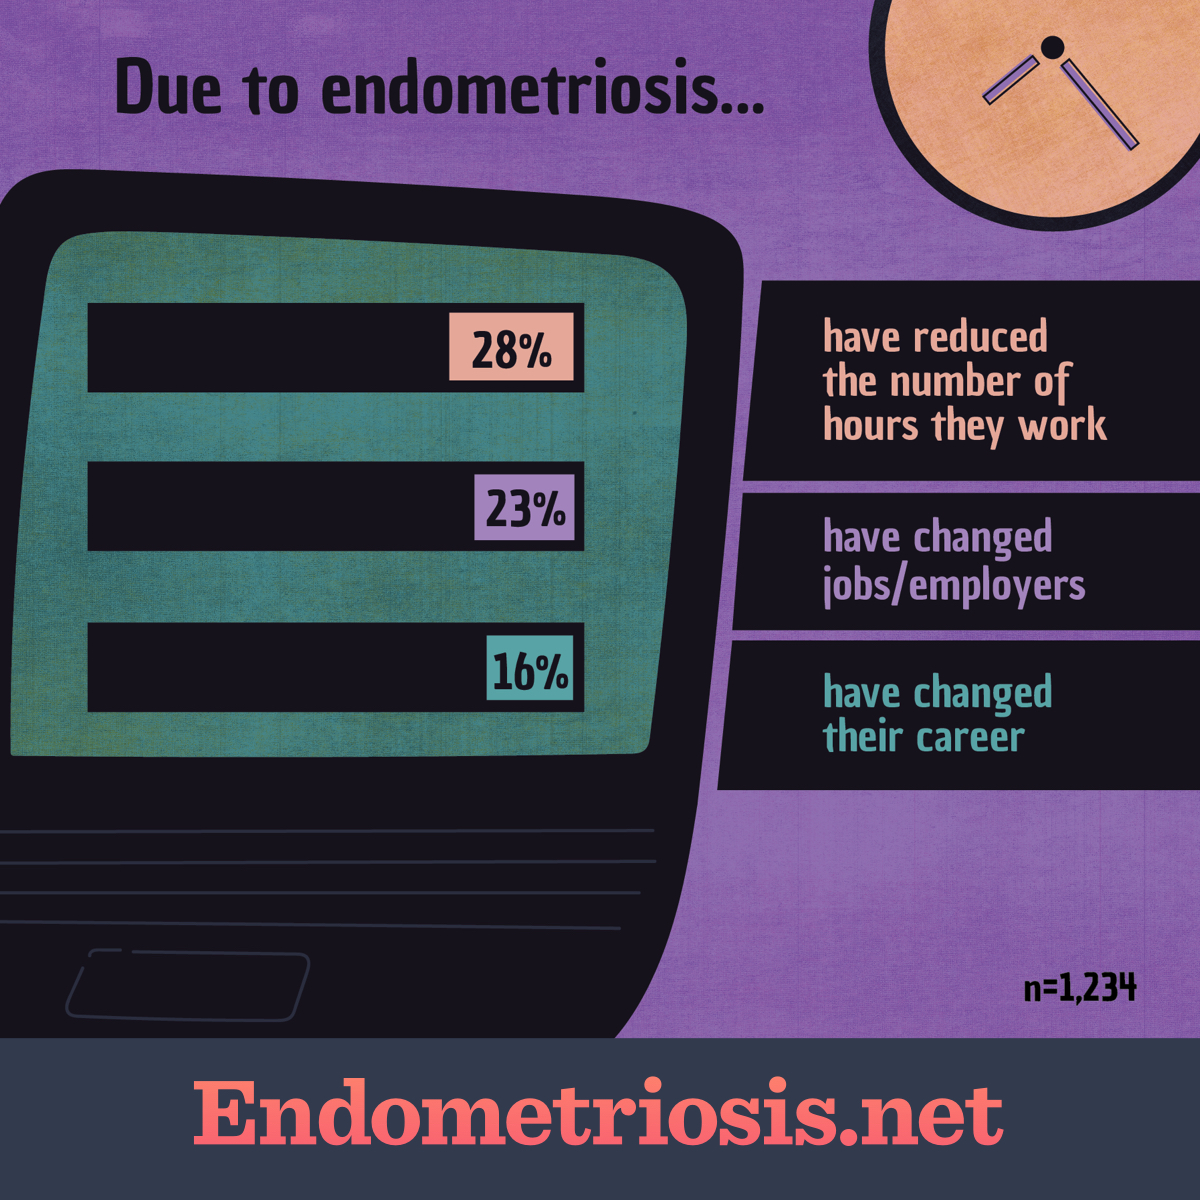 Because of endometriosis, 28% have reduced hours they work, 23% have changed jobs/employers, 16% have changed their career